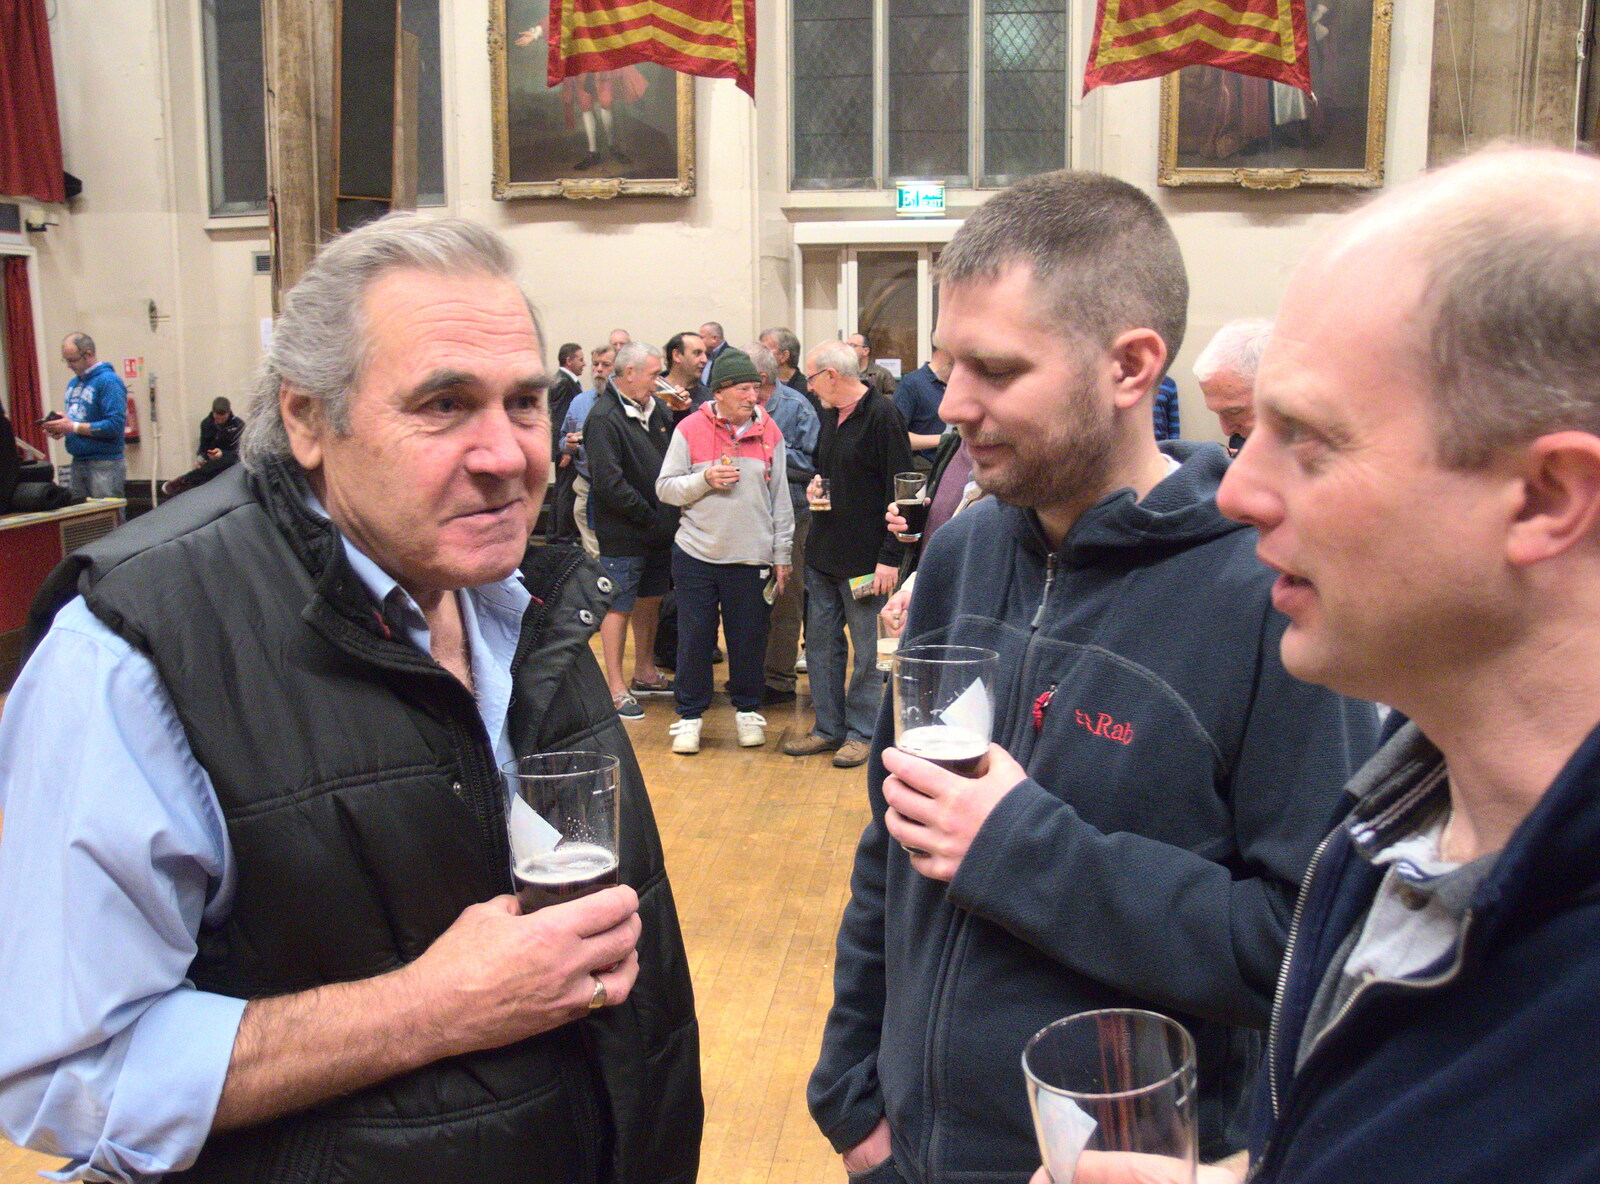 Alan, Phil and Paul from The Norwich Beer Festival, St. Andrew's Hall, Norwich, Norfolk - 26th October 2016